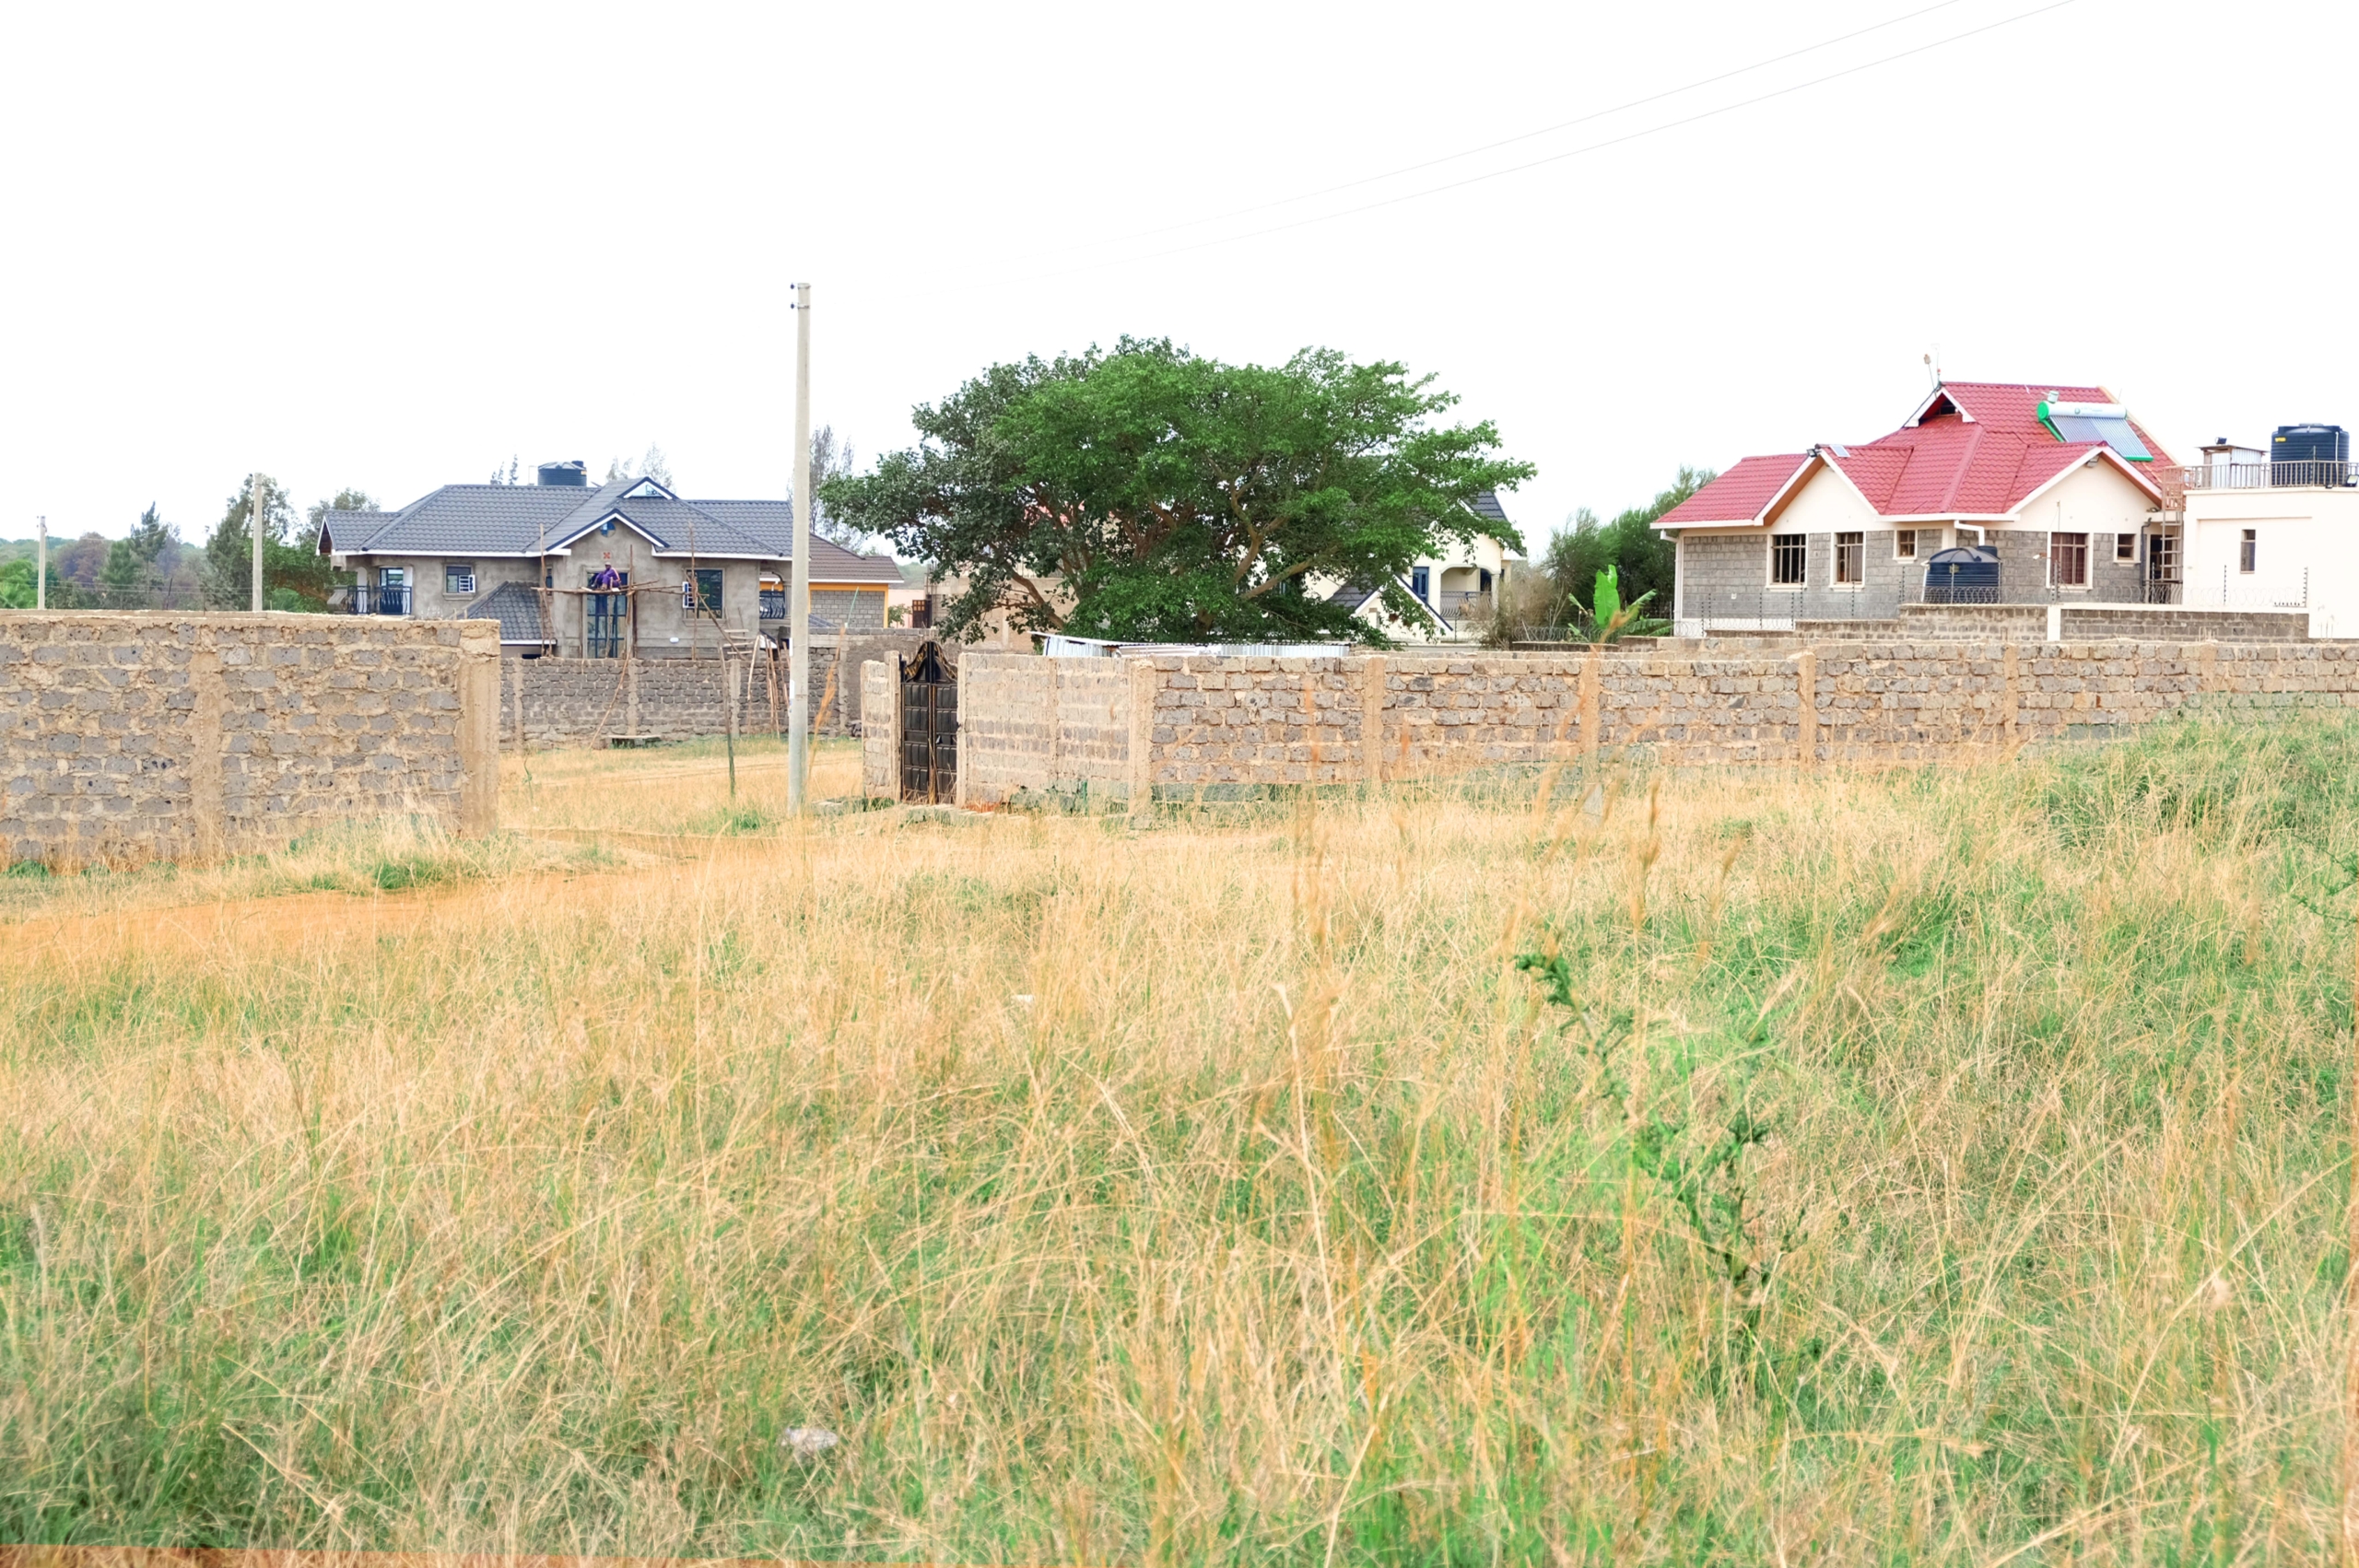 Tola Ngoingwa 40 by 80 Residential Plots